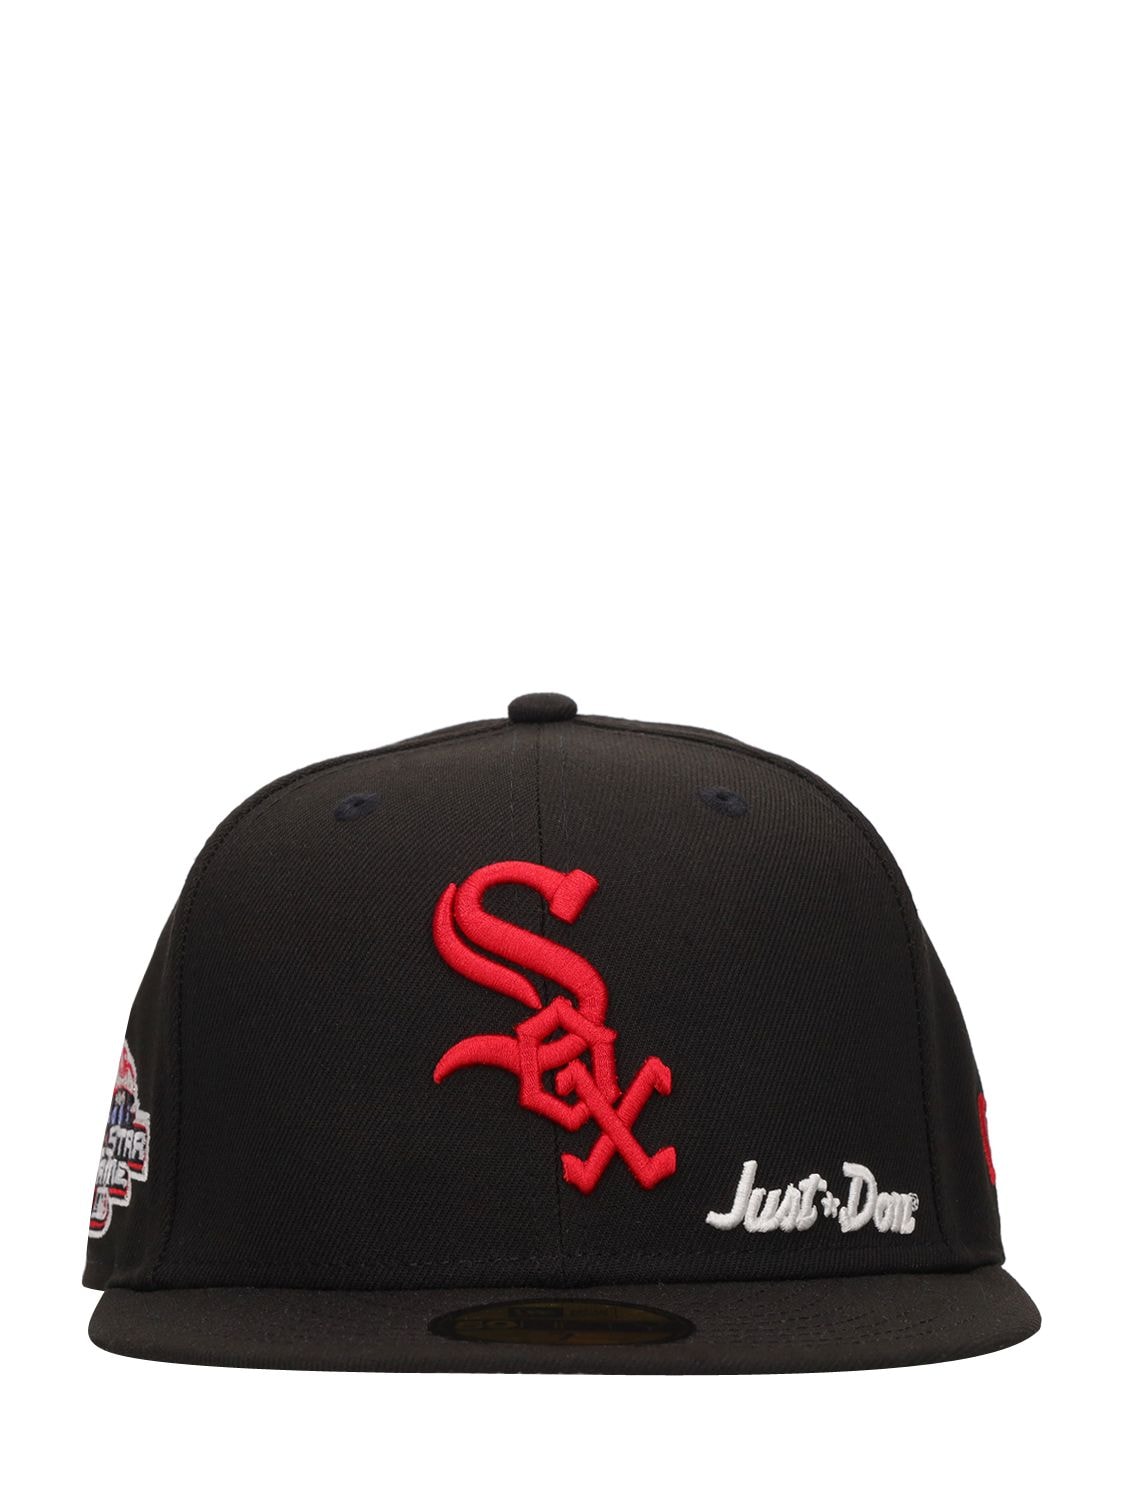 Chicago White Sox New Era x Just Don 59FIFTY Fitted Hat - Black